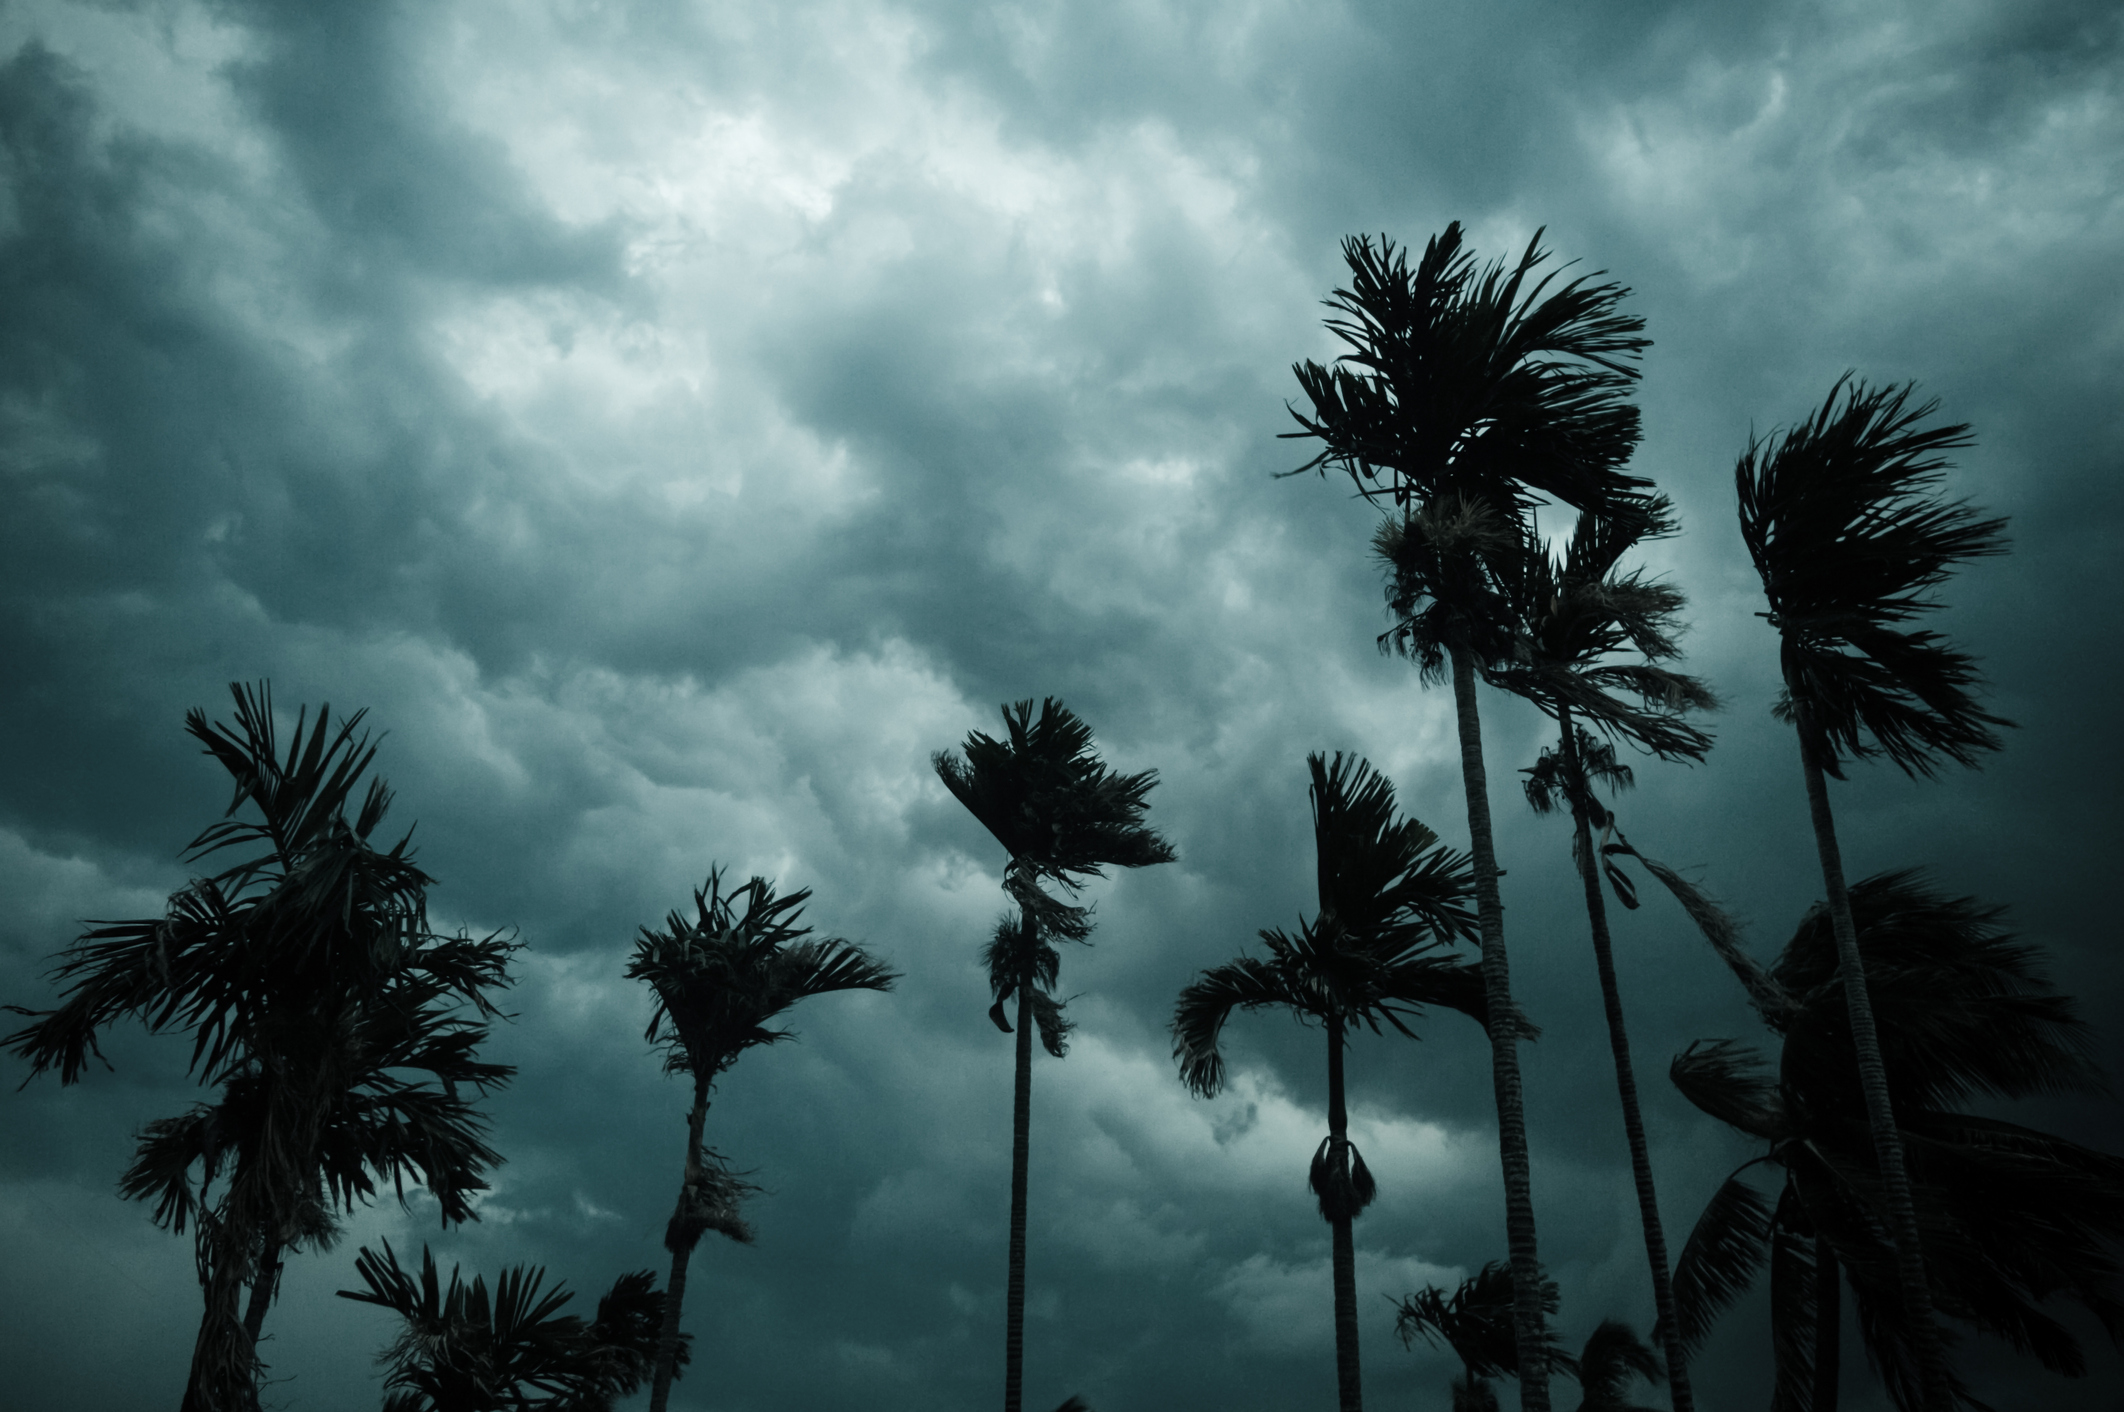 Silhouettes of palm trees against a dark, cloudy sky